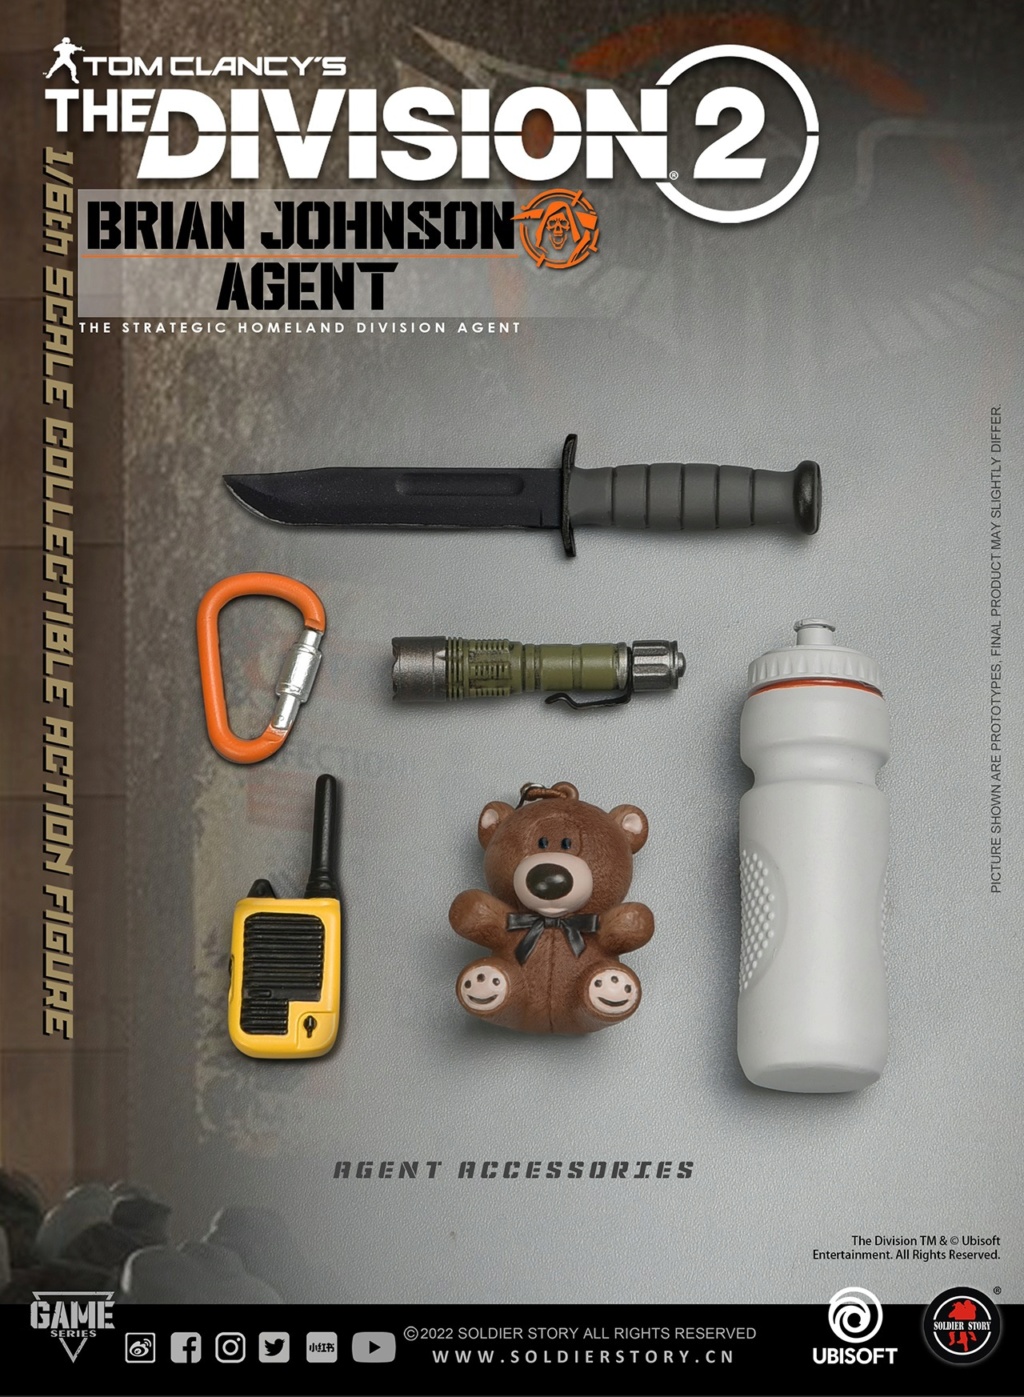 book - NEW PRODUCT: Soldierstory: 1/6 Tom Clancy's The Division 2 - Agent Brian Johnson Universal/Deluxe SSG-005/006 22230210